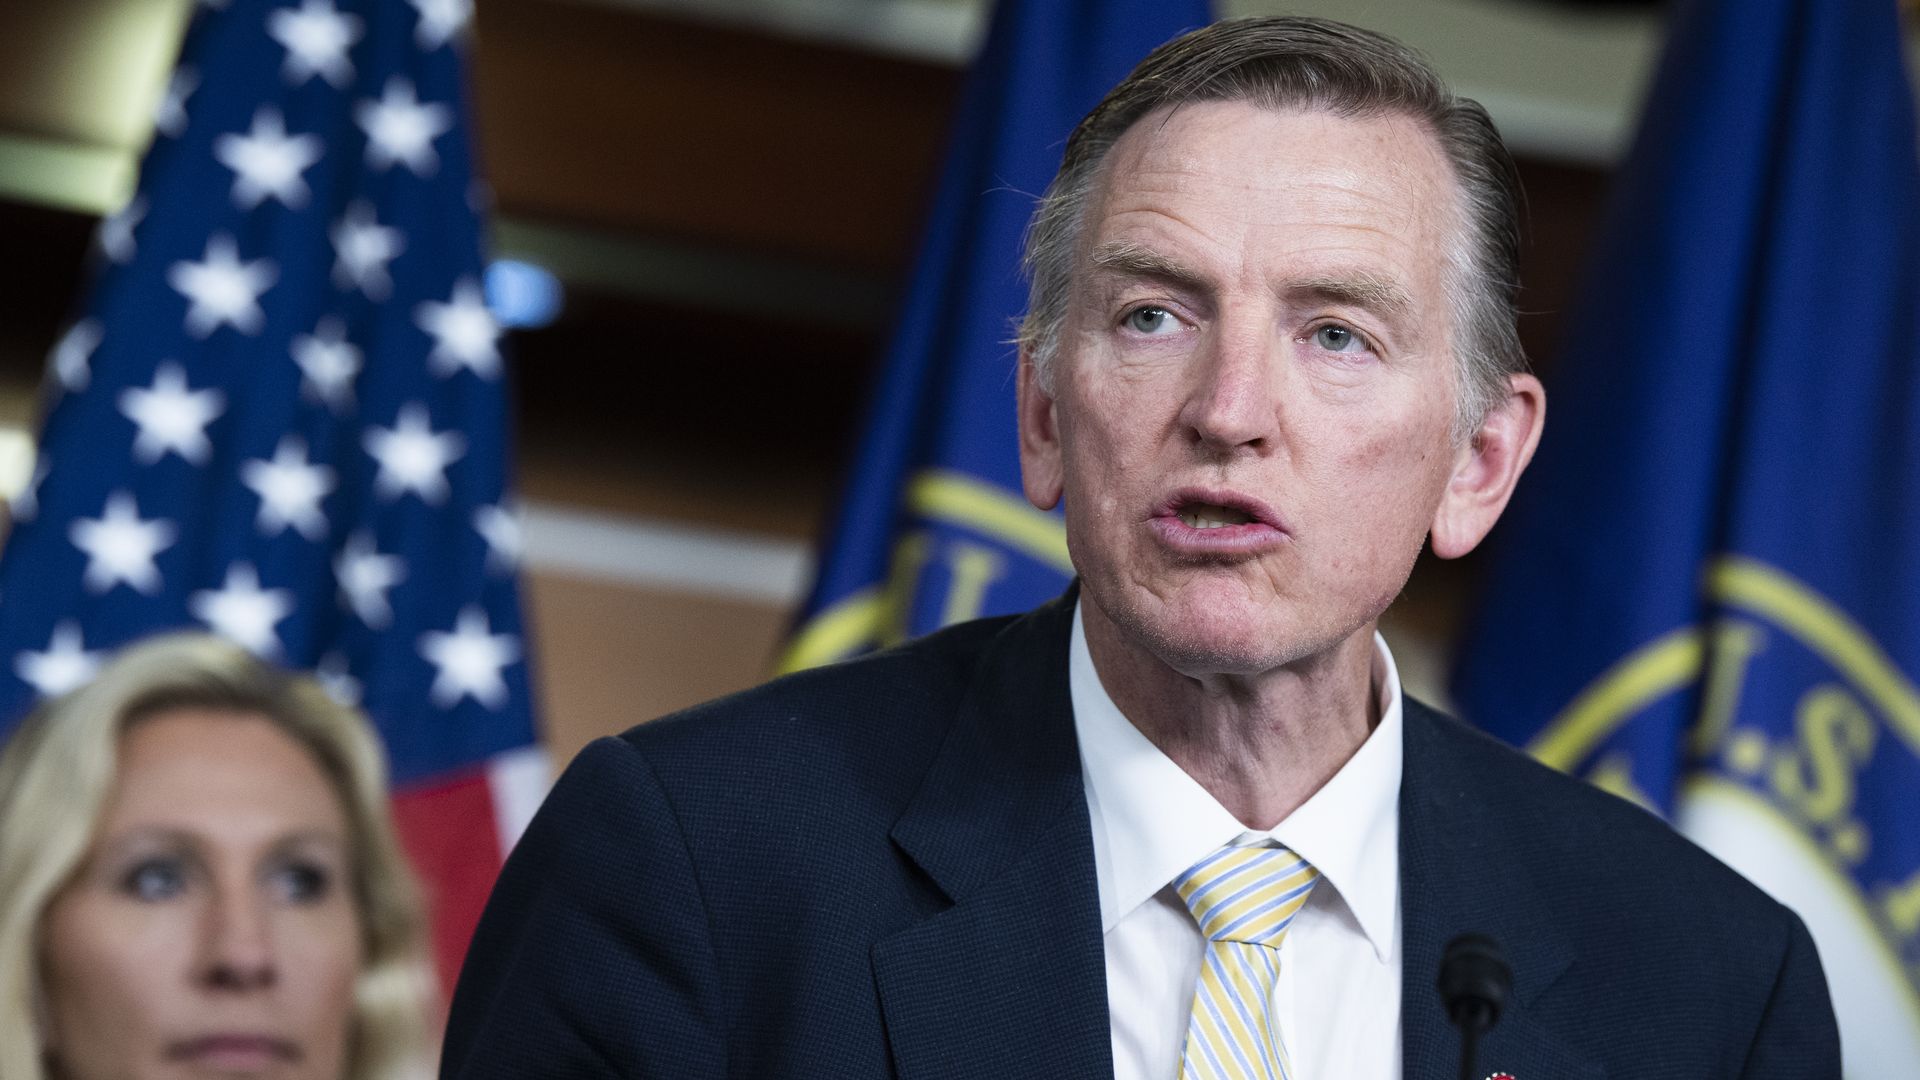 Rep. Paul Gosar (R-Ariz.) at the Capitol on June 15, 2021. Photo: Tom Williams/CQ-Roll Call, Inc via Getty Images